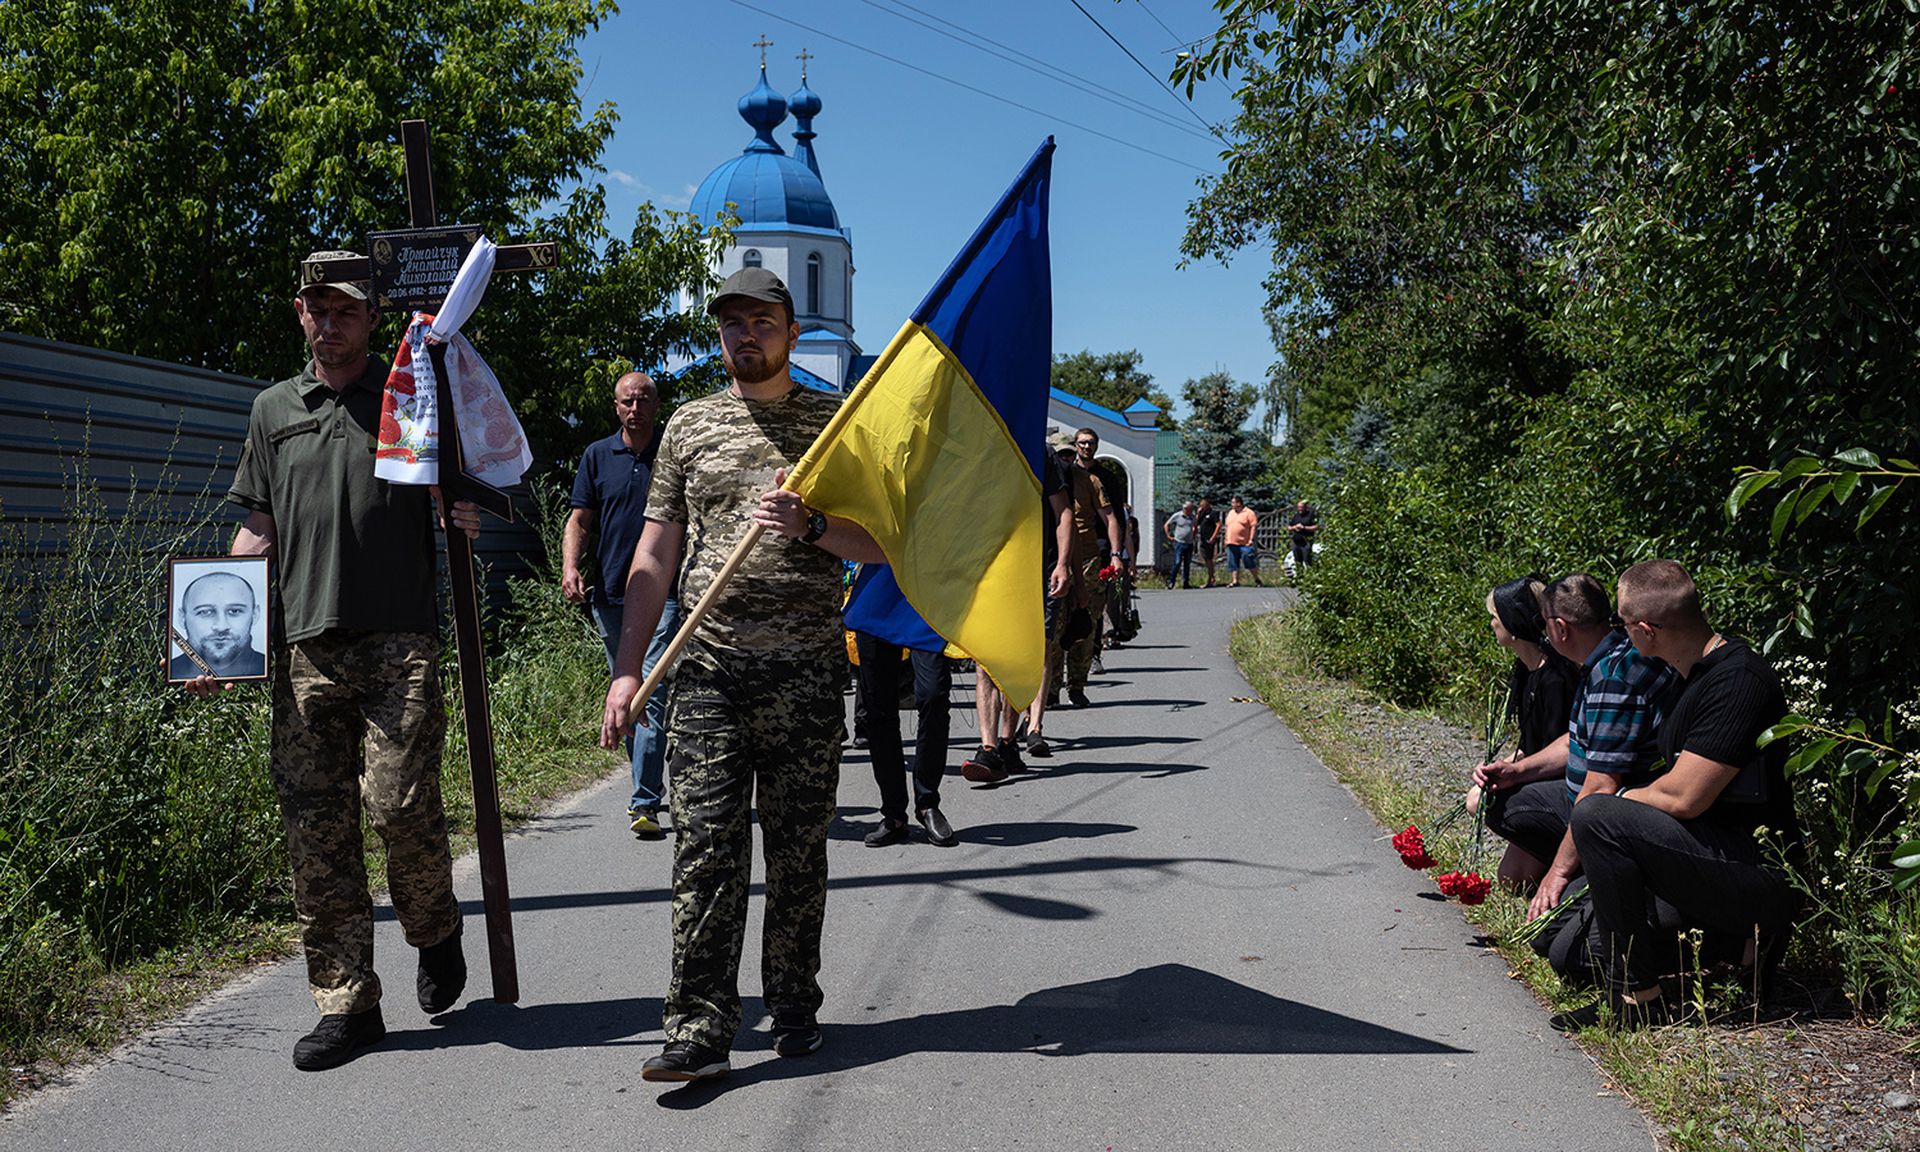 A leading financial technology analyst says every organization needs to be prepared for a cyber incident related to the Russia-Ukraine war. Pictured: People kneel as the funeral procession for Anatolii Potaichuk passes by on July 2, 2022, in Babyntsi, Ukraine. (Photo by Alexey Furman/Getty Images)